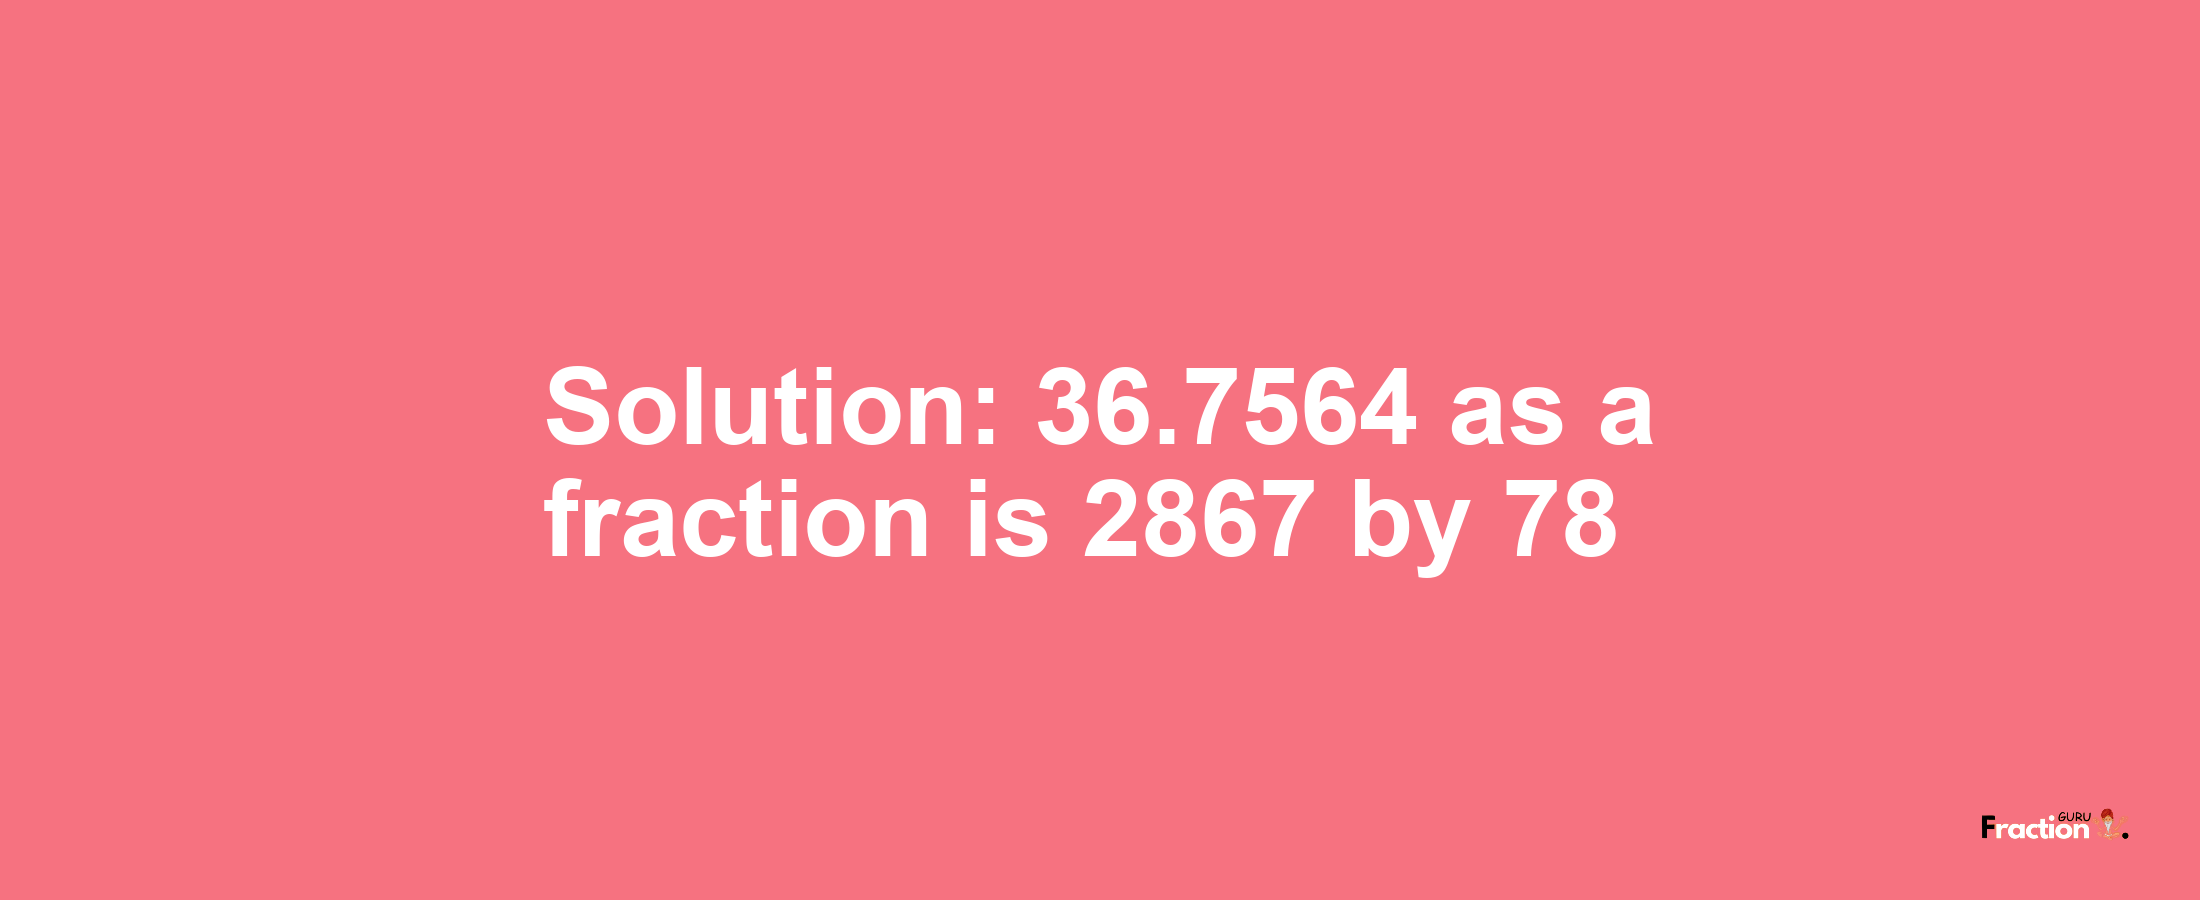 Solution:36.7564 as a fraction is 2867/78